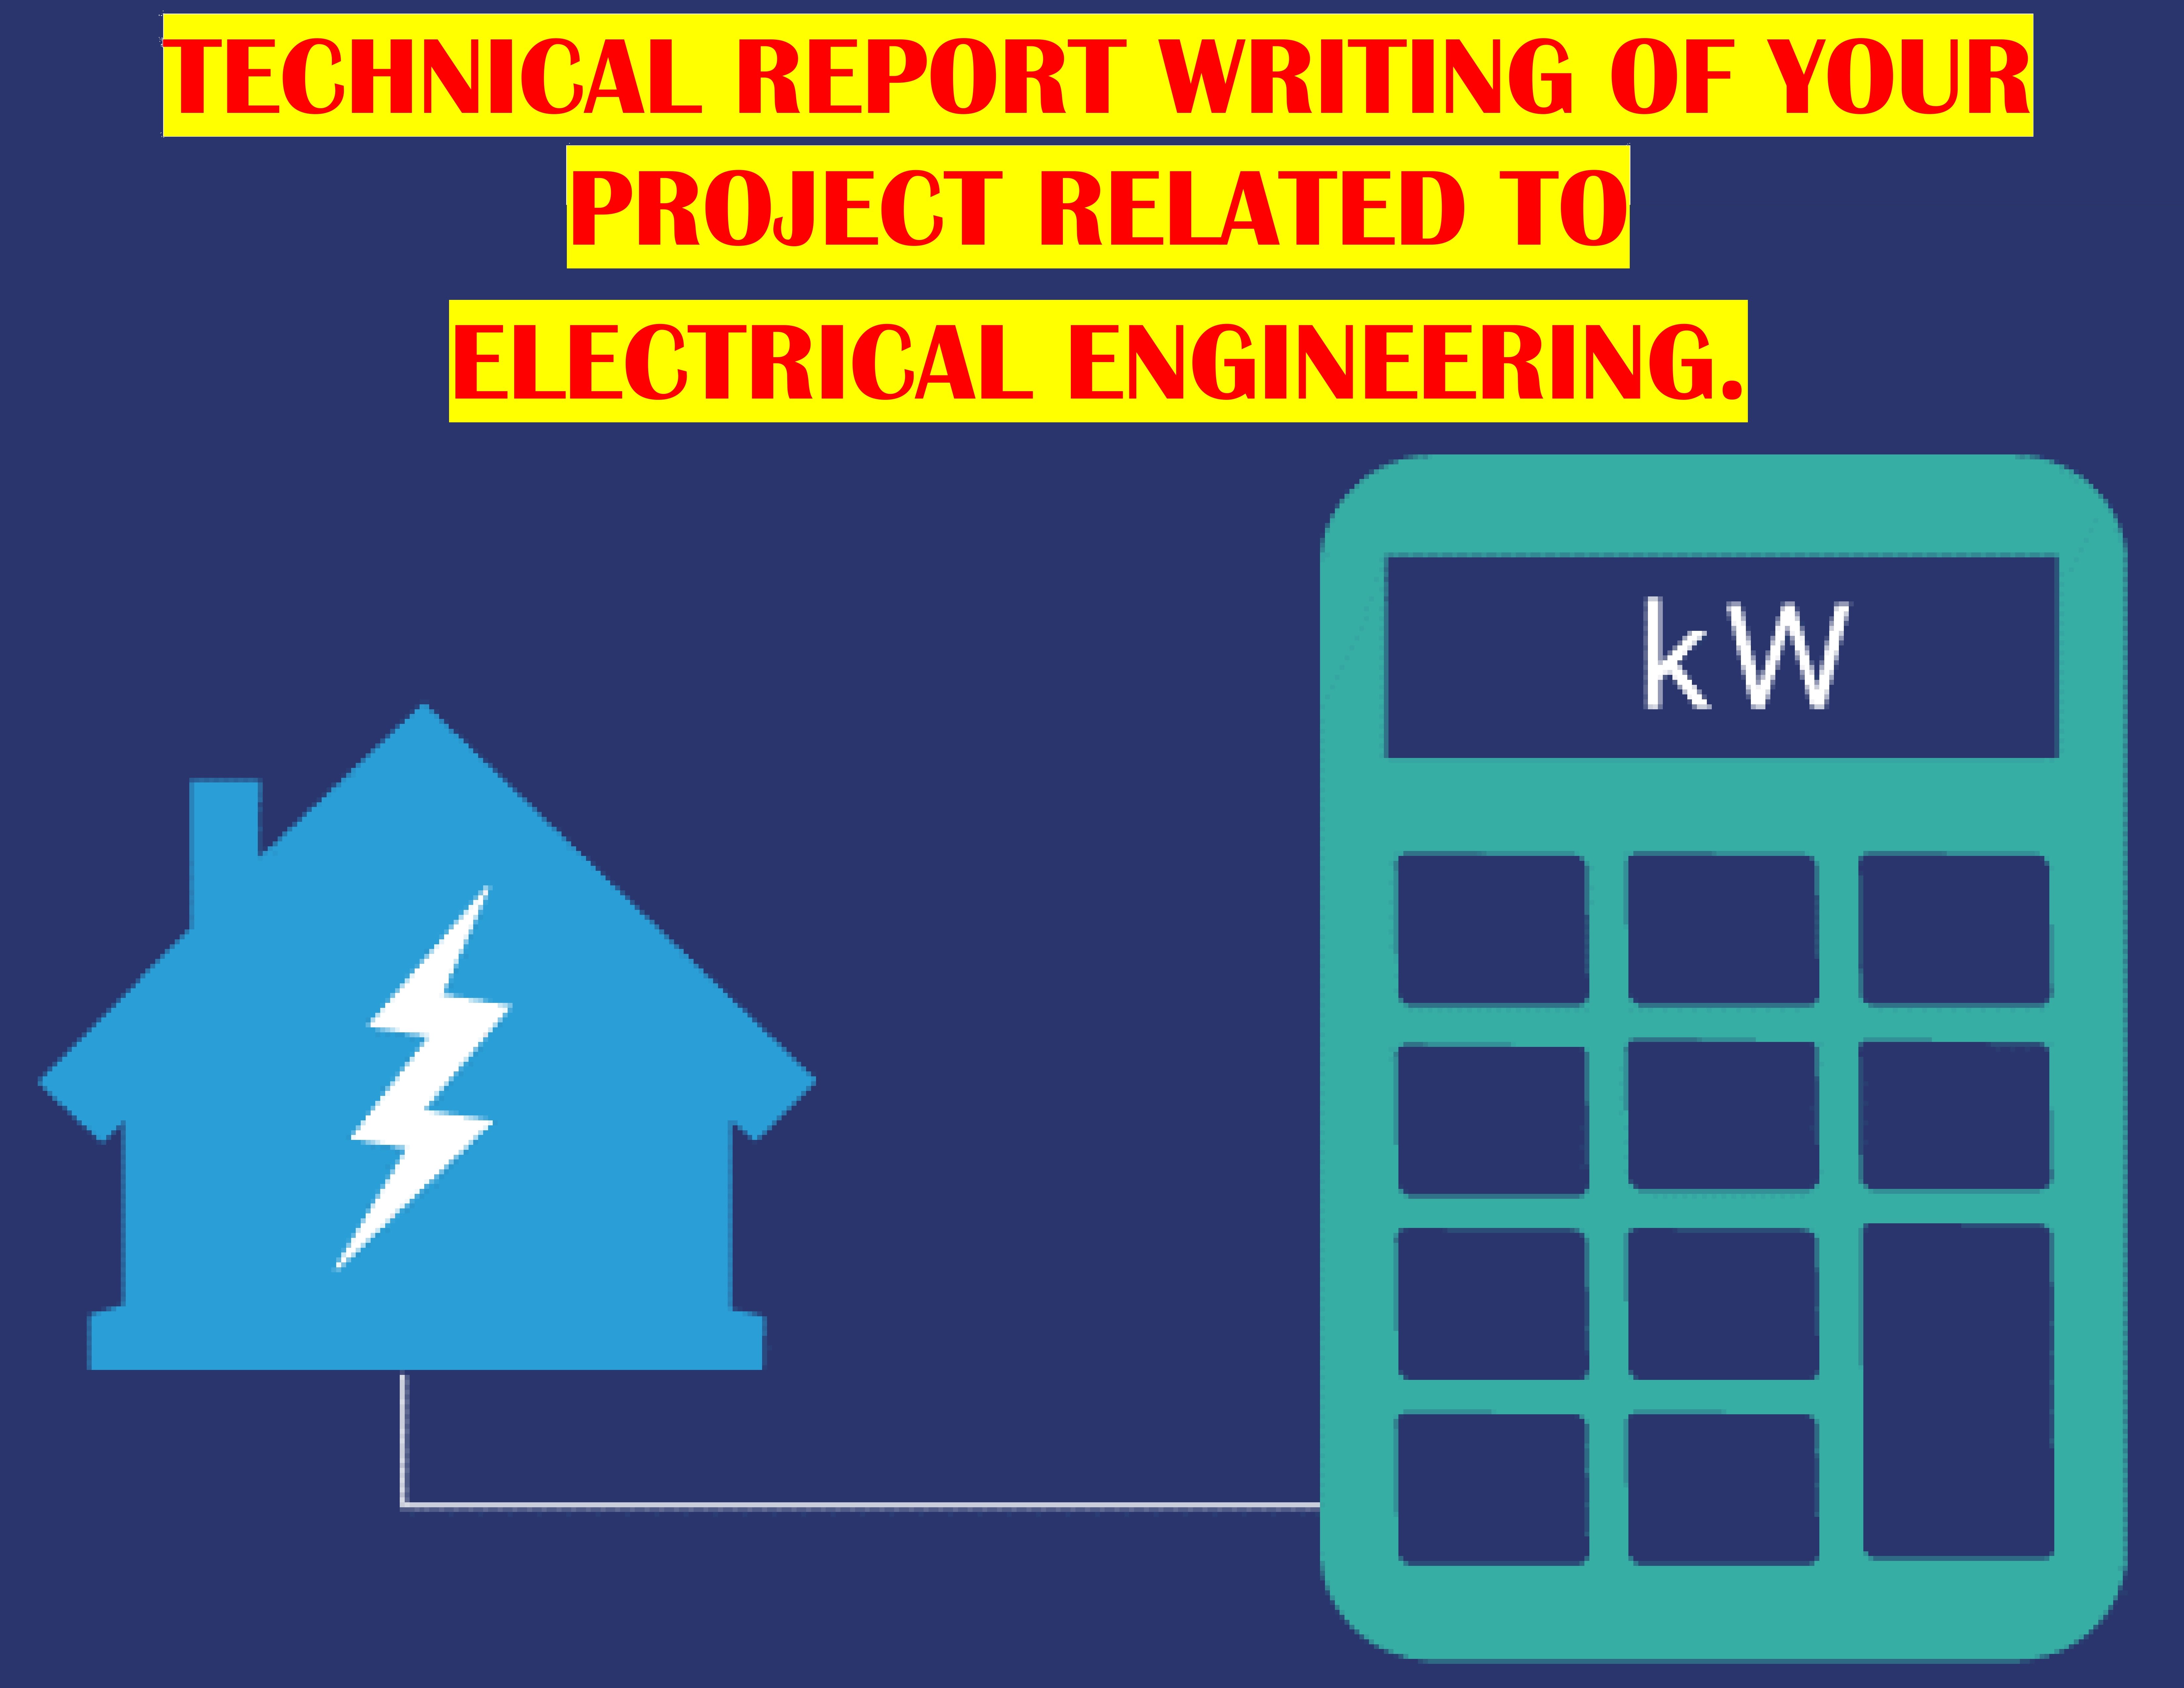 Write a technical report related to electrical engineering by